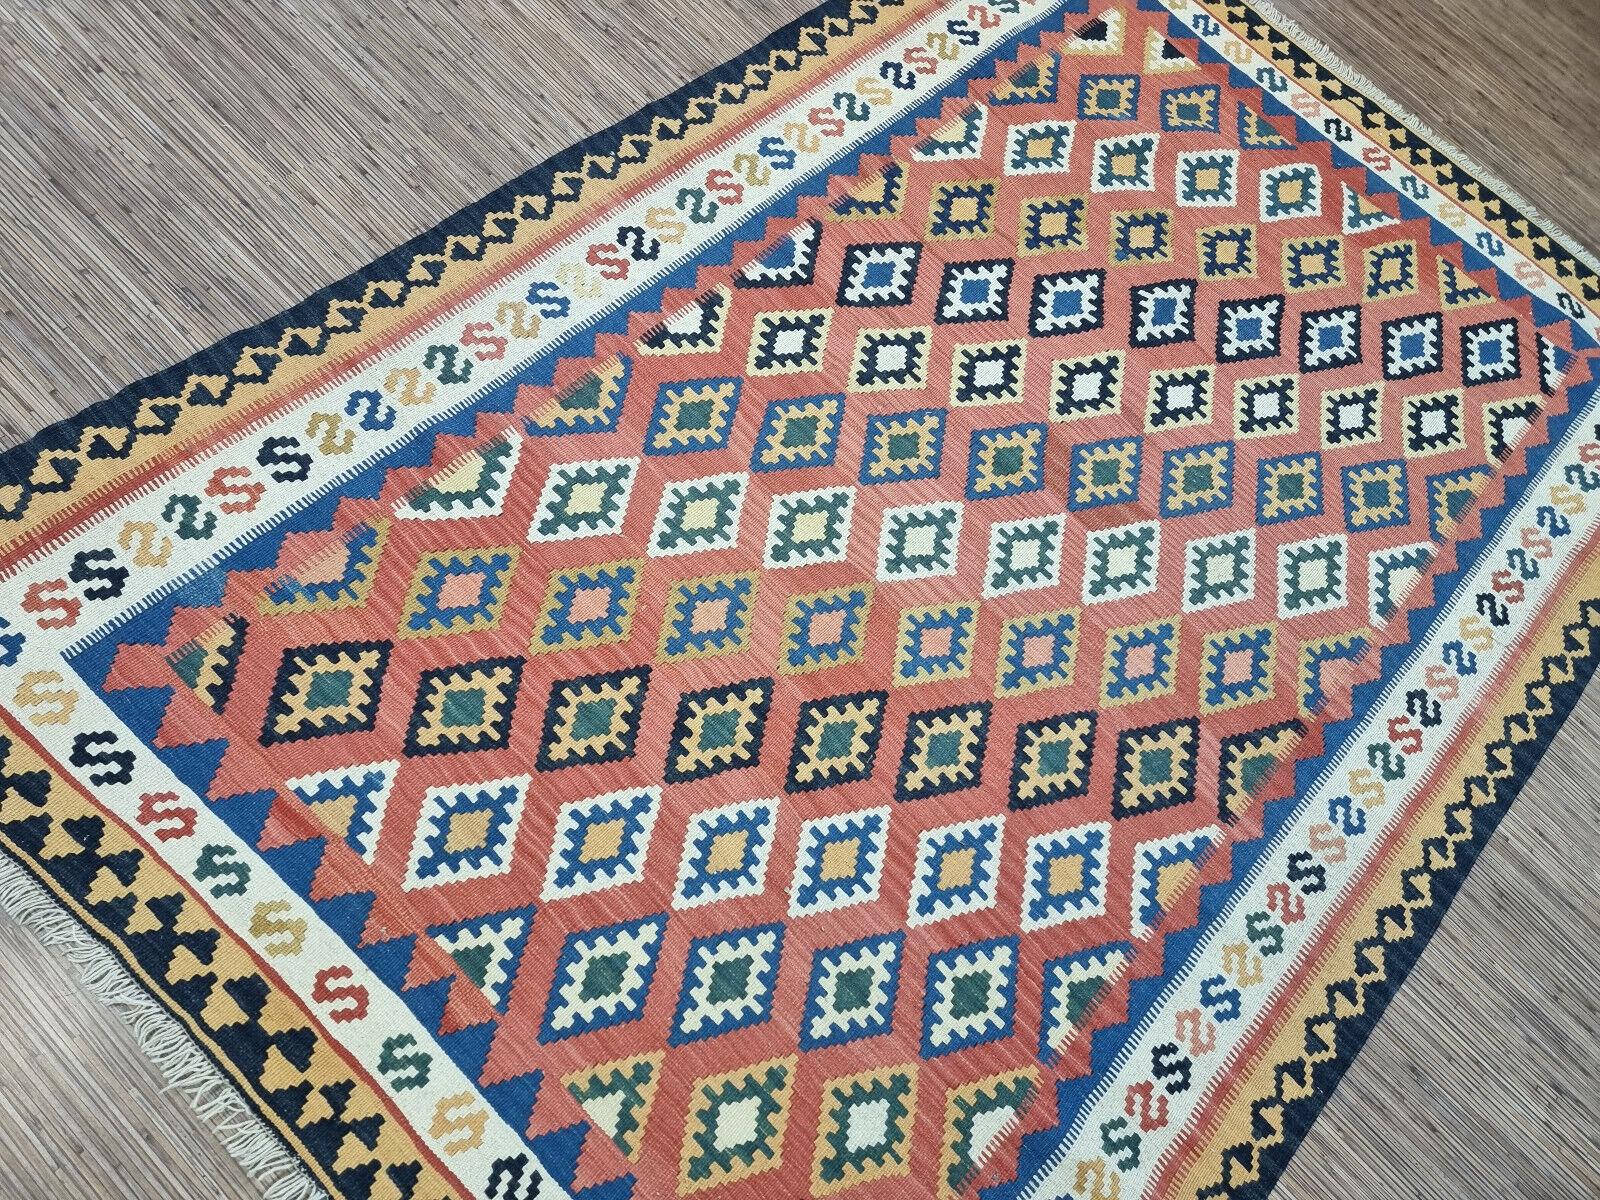 Handmade Vintage Persian Style Ardabil Kilim Rug 4.9' x 7.2', 1970s - 1D91 For Sale 5